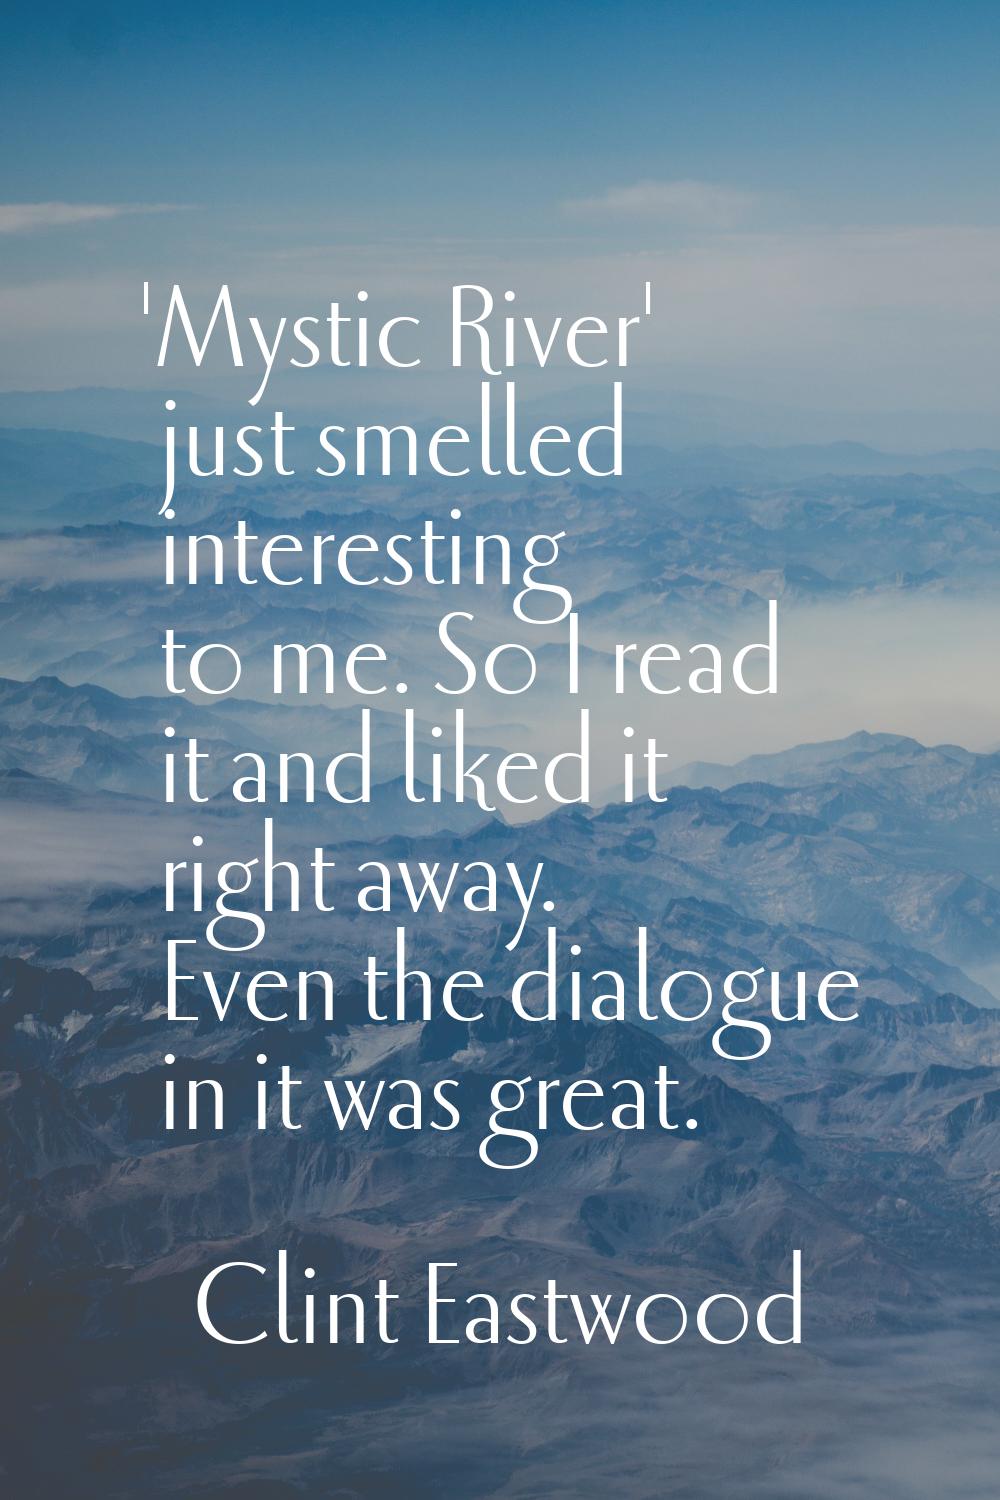 'Mystic River' just smelled interesting to me. So I read it and liked it right away. Even the dialo